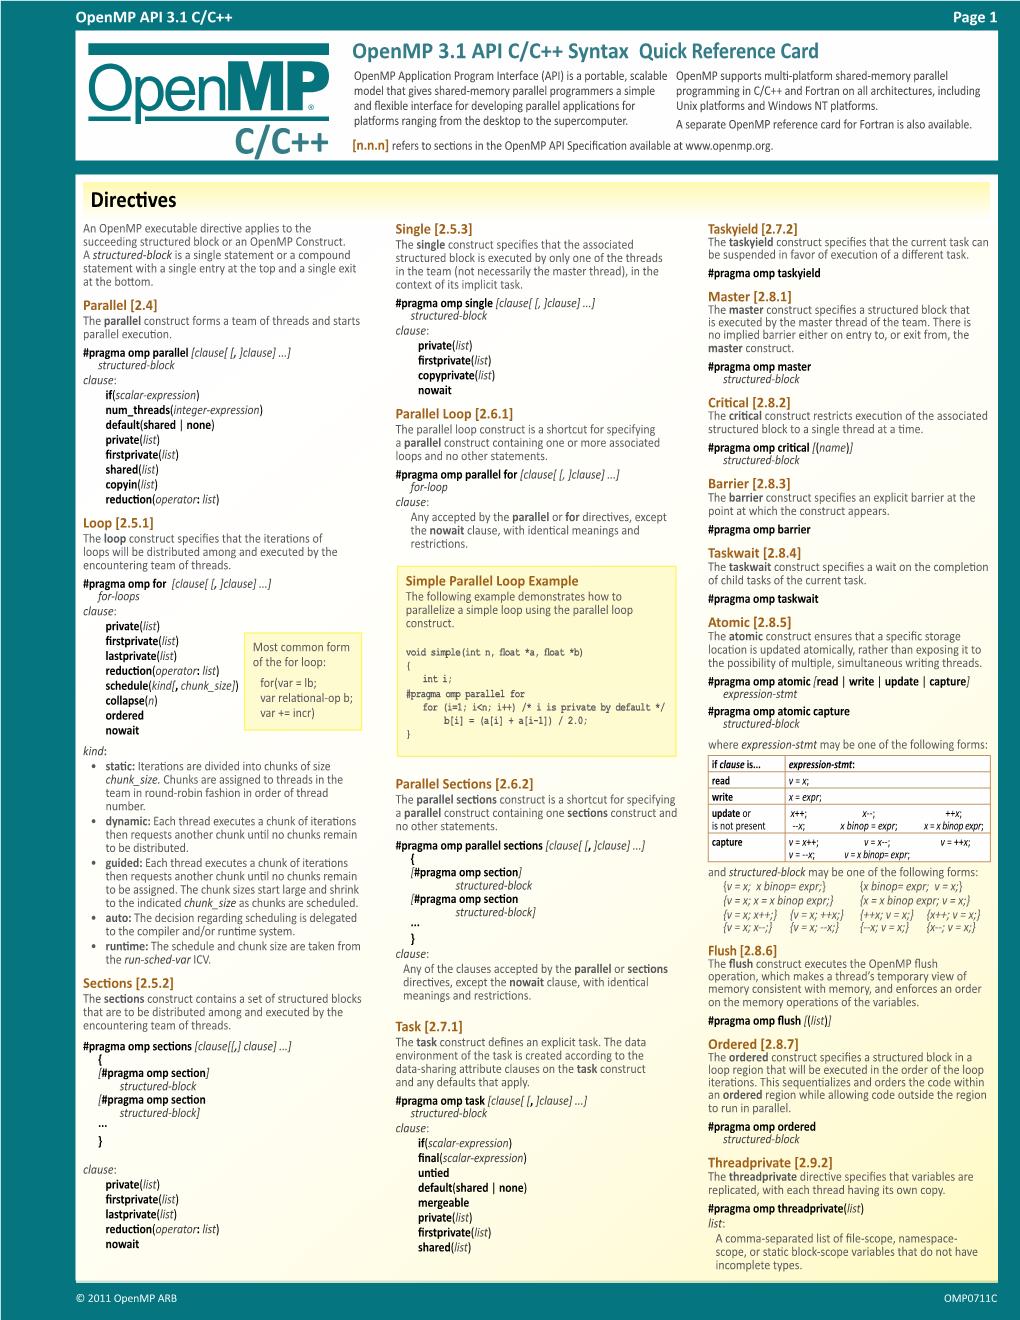 Openmp 3.1 API C/C++ Syntax Quick Reference Card